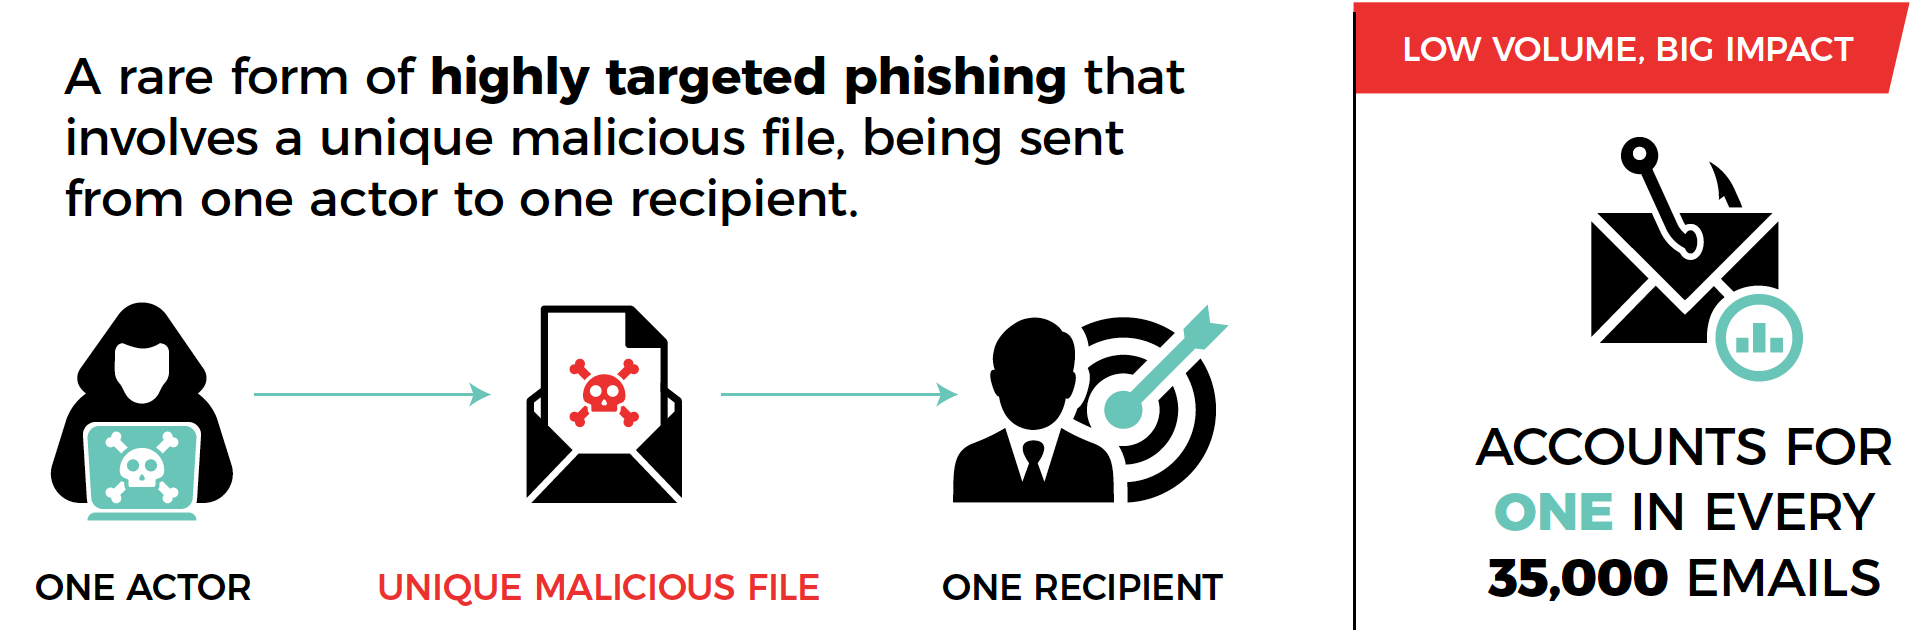 Social Engineering 2.0 - Evasive Spear Phishing and Vendor Email Compromise